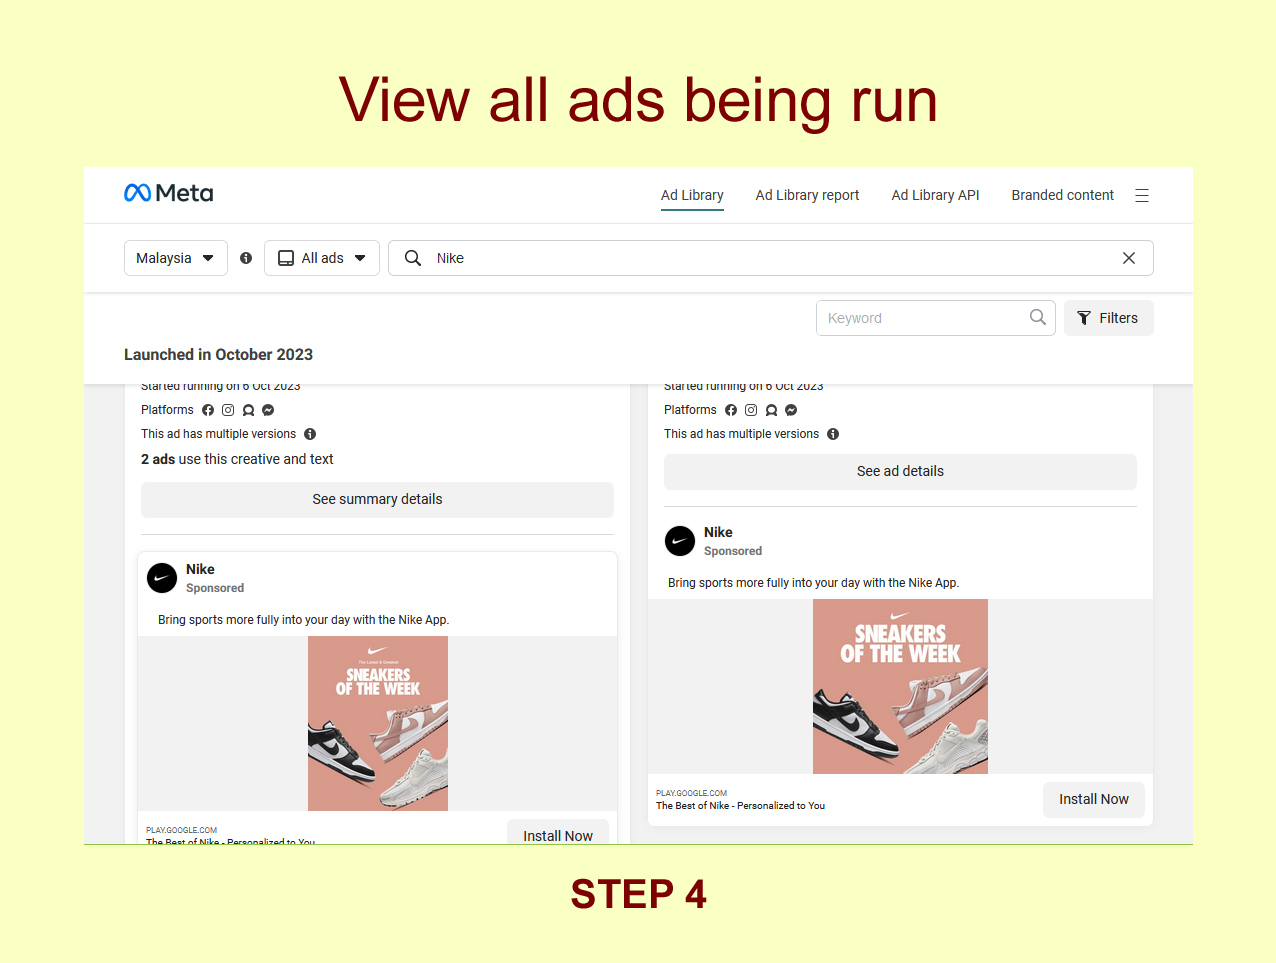 Step 4 - View all ads being run